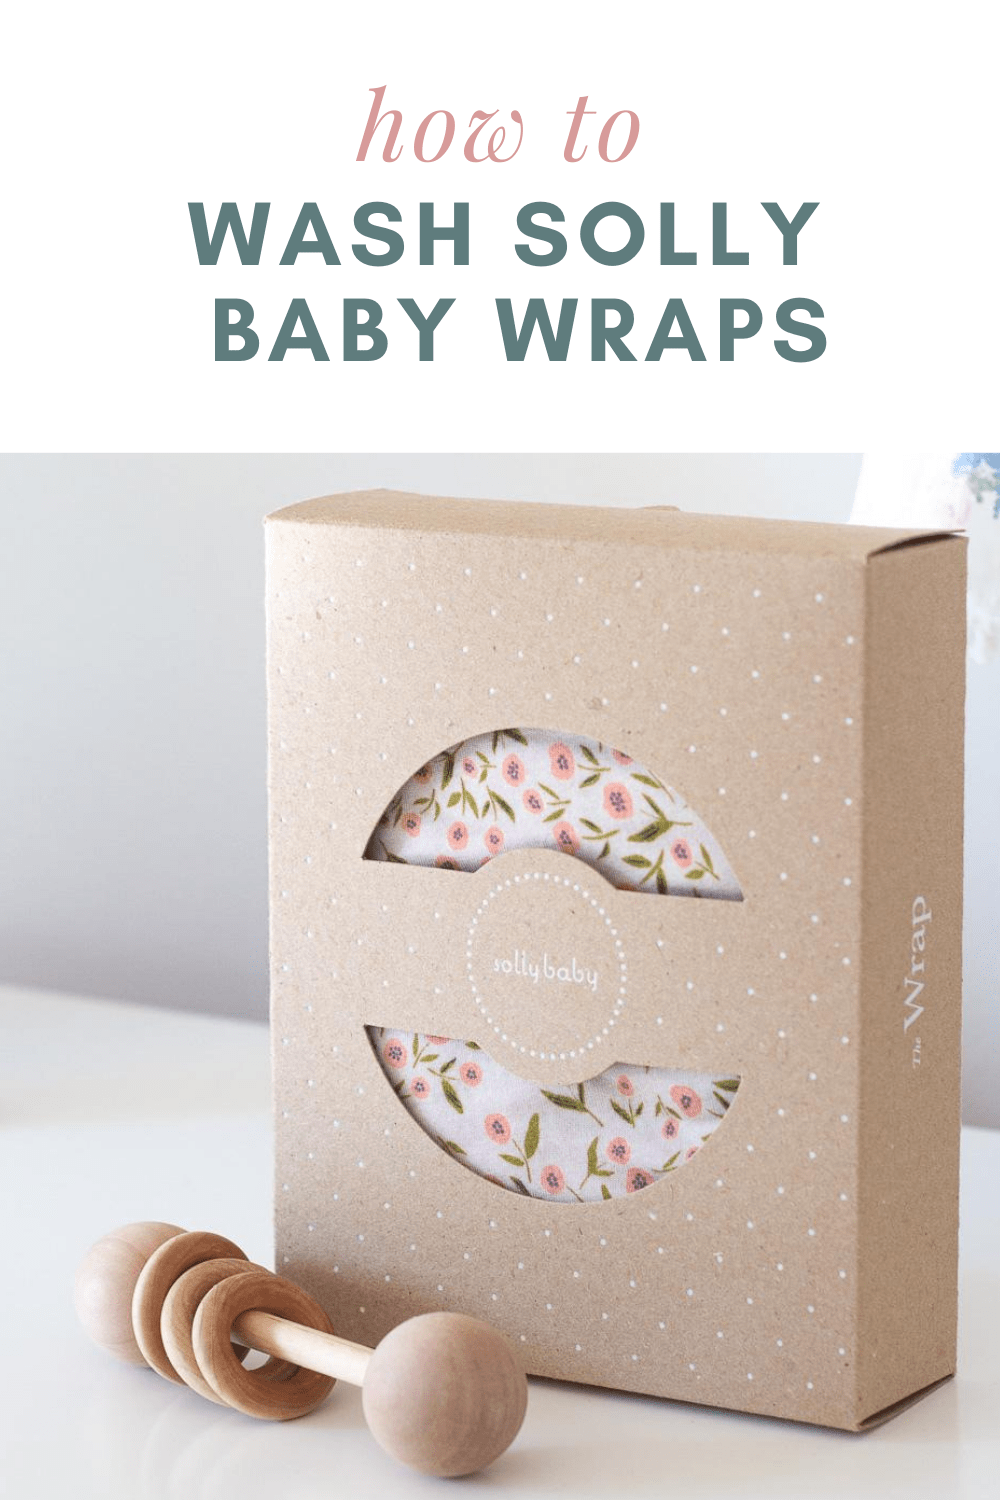 Solly Baby Wrap in a box with the words, “How to Wash a Solly Baby Wrap” on the image.